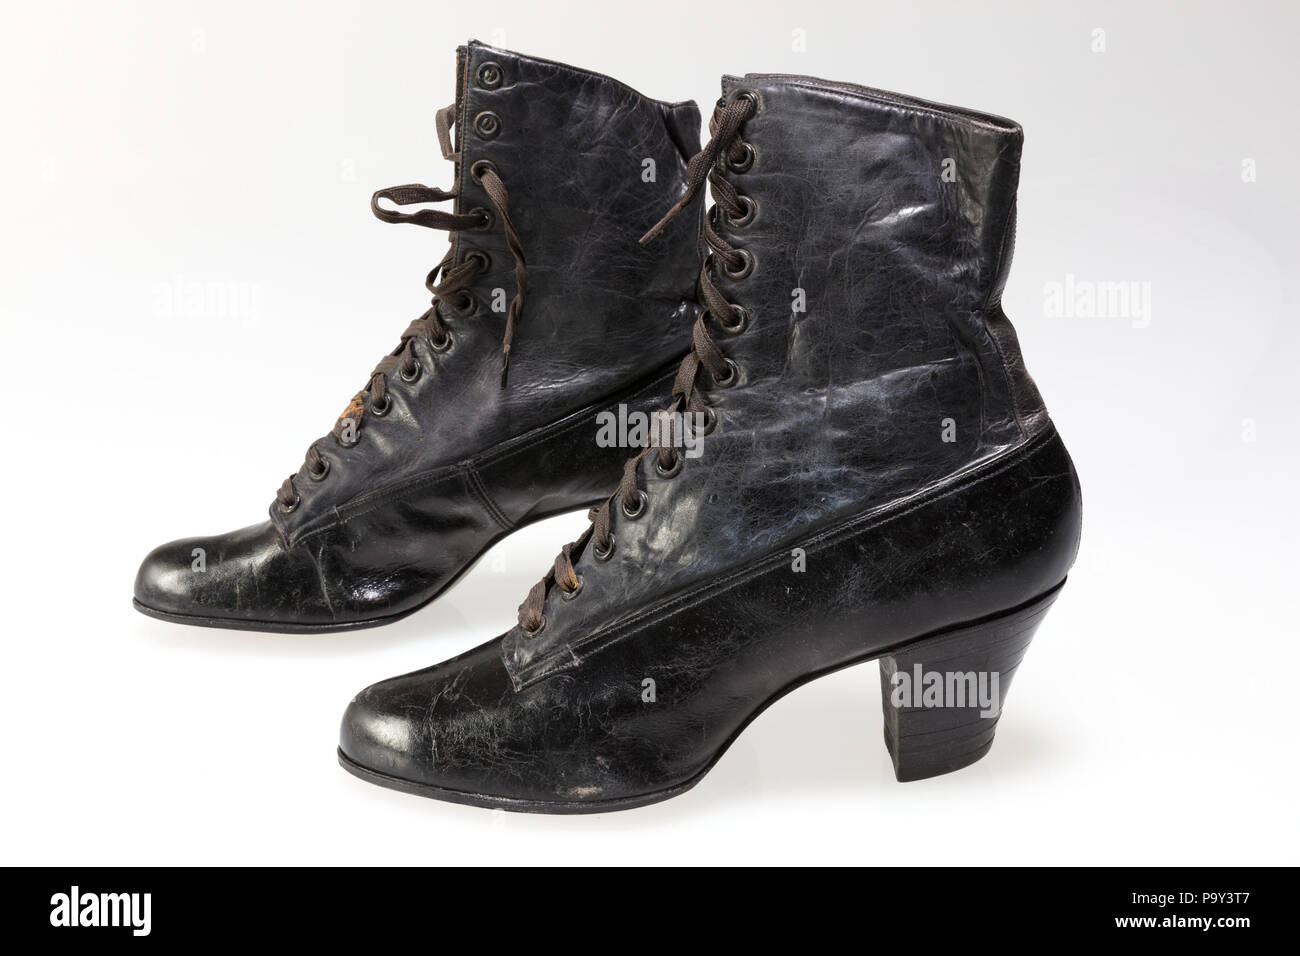 English: Burrow, Jones, and Dyer Lady Jefferson women's black leather  lace-up boots.Between 1900 and 1922, St. Louis evolved from a distribution  center for eastern-made shoes to the nation's foremost center of